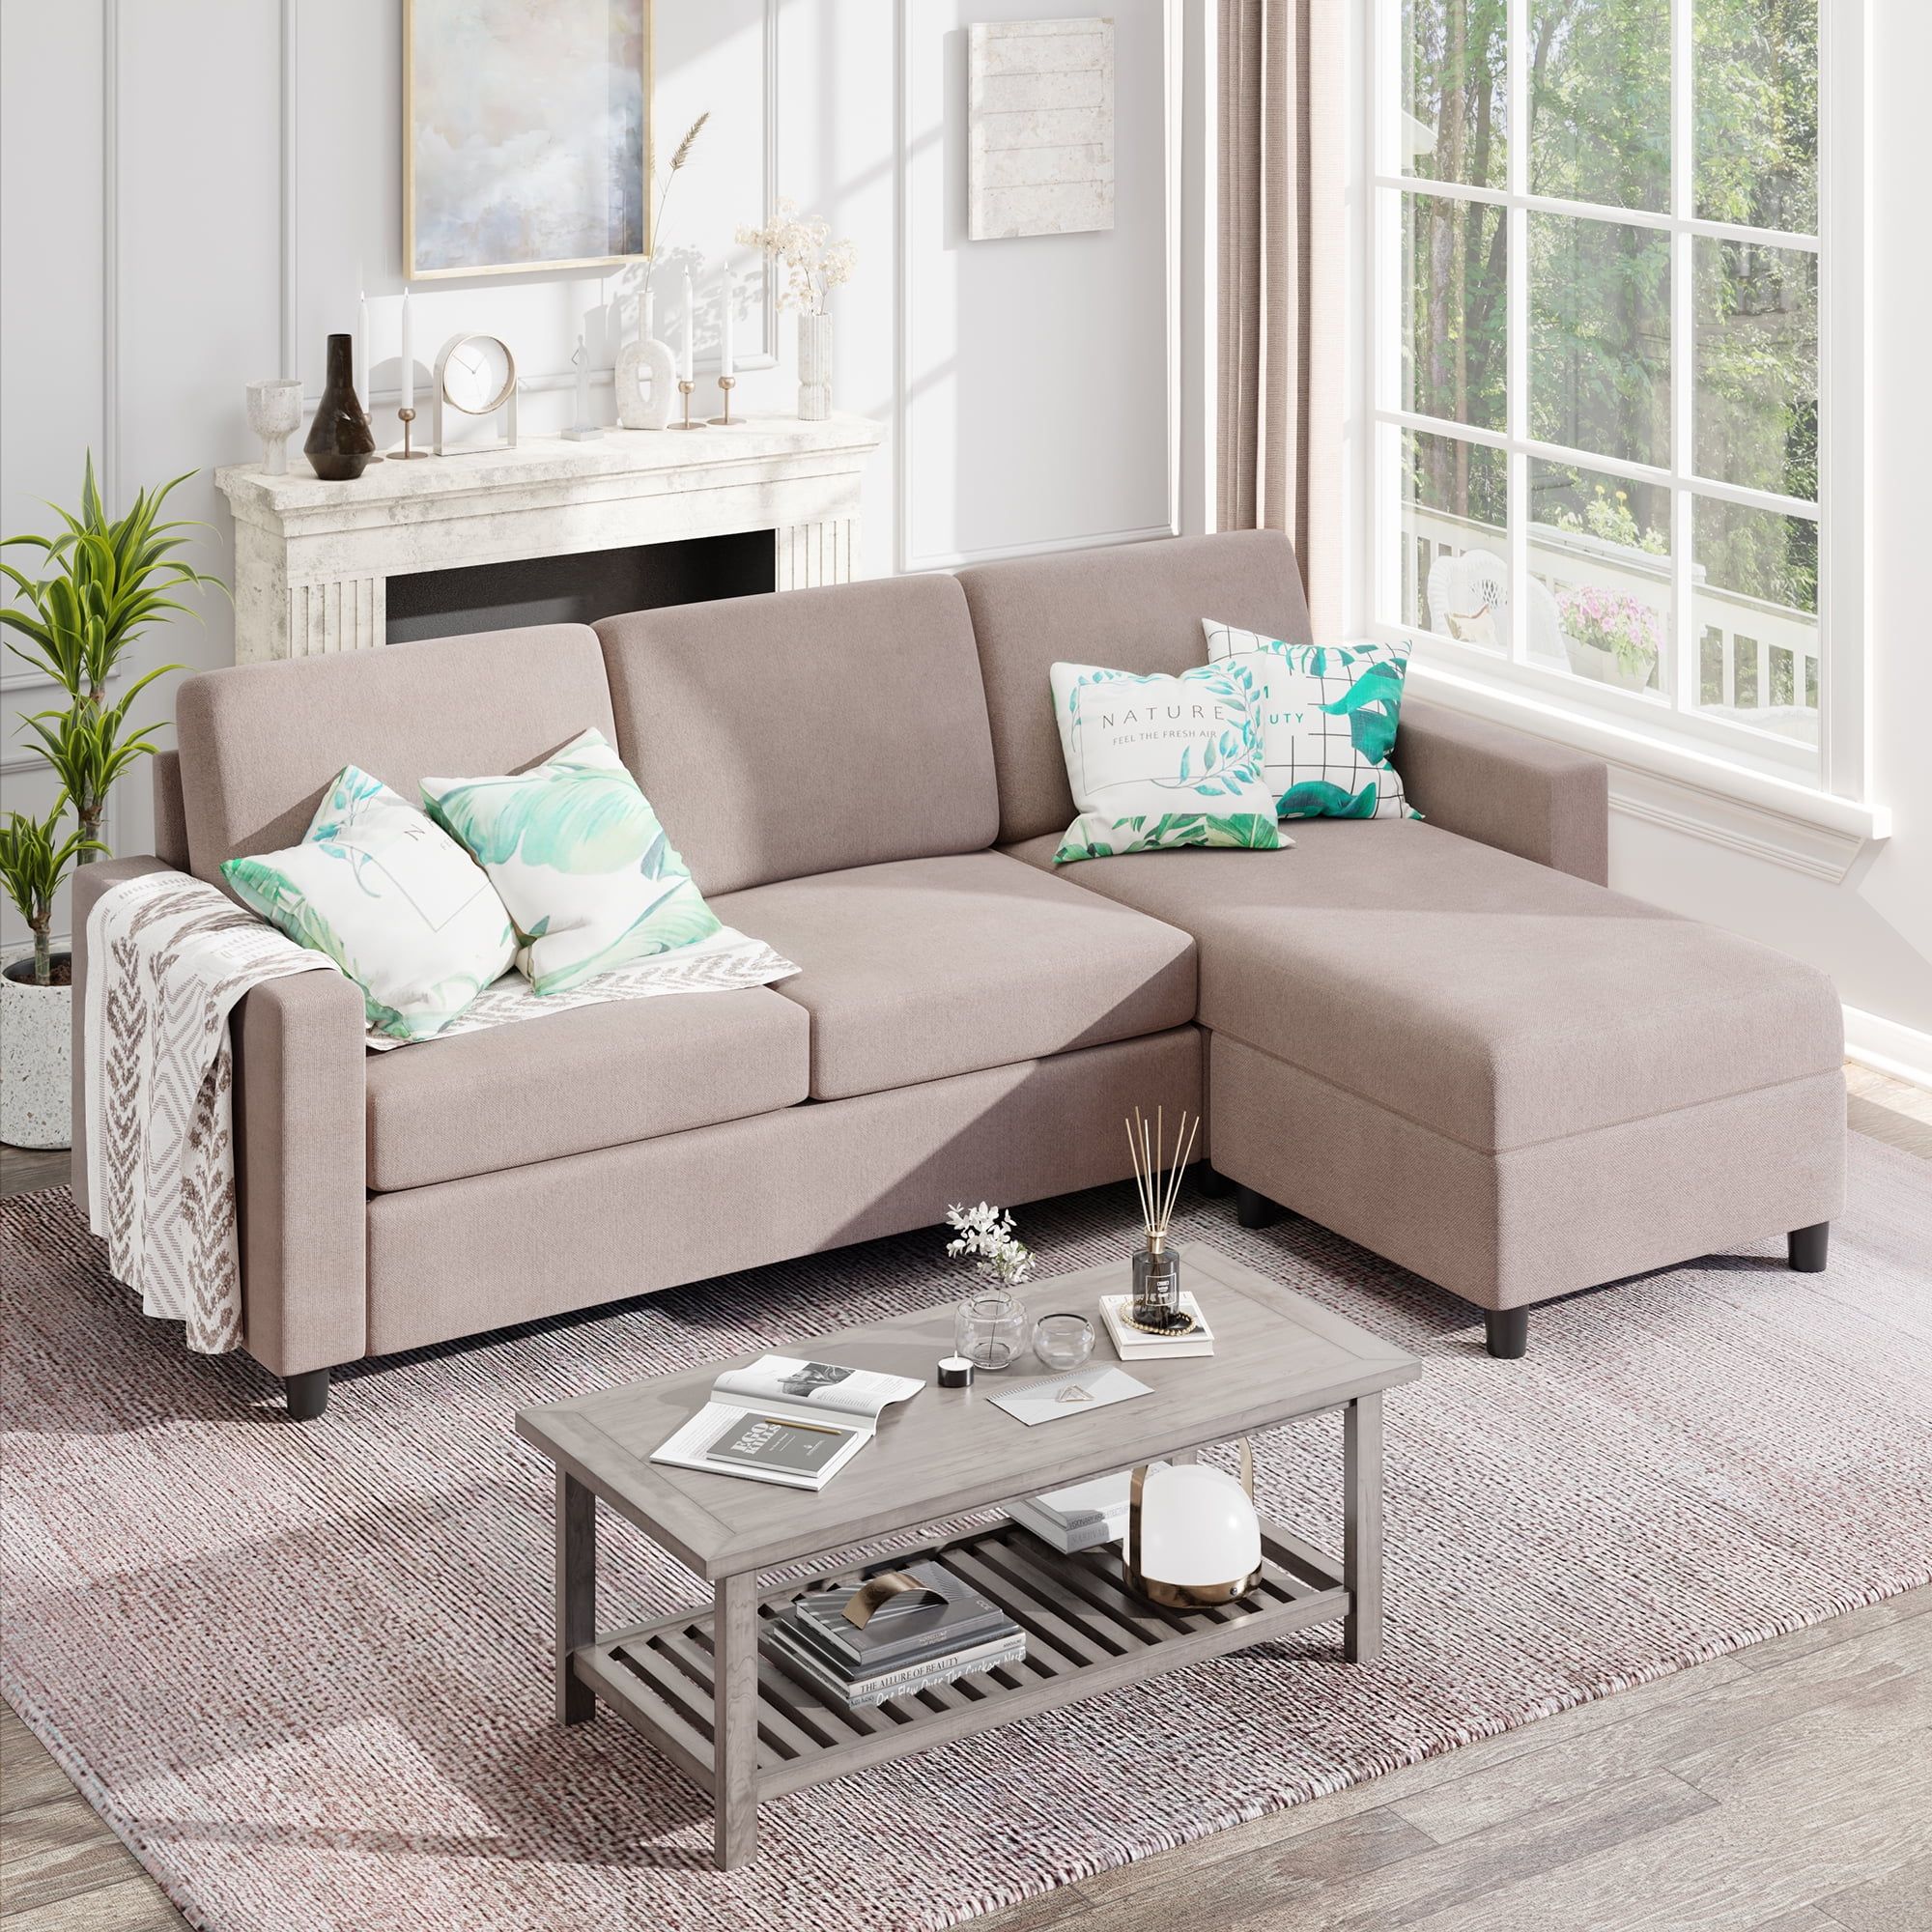 Sobaniilo Convertible Sectional Sofa Couch, Modern Linen Fabric L Shaped 3 Seat  Sofa Sectional With Reversible Chaise For Small Space, Tan – Walmart With 3 Seat Convertible Sectional Sofas (Photo 1 of 15)